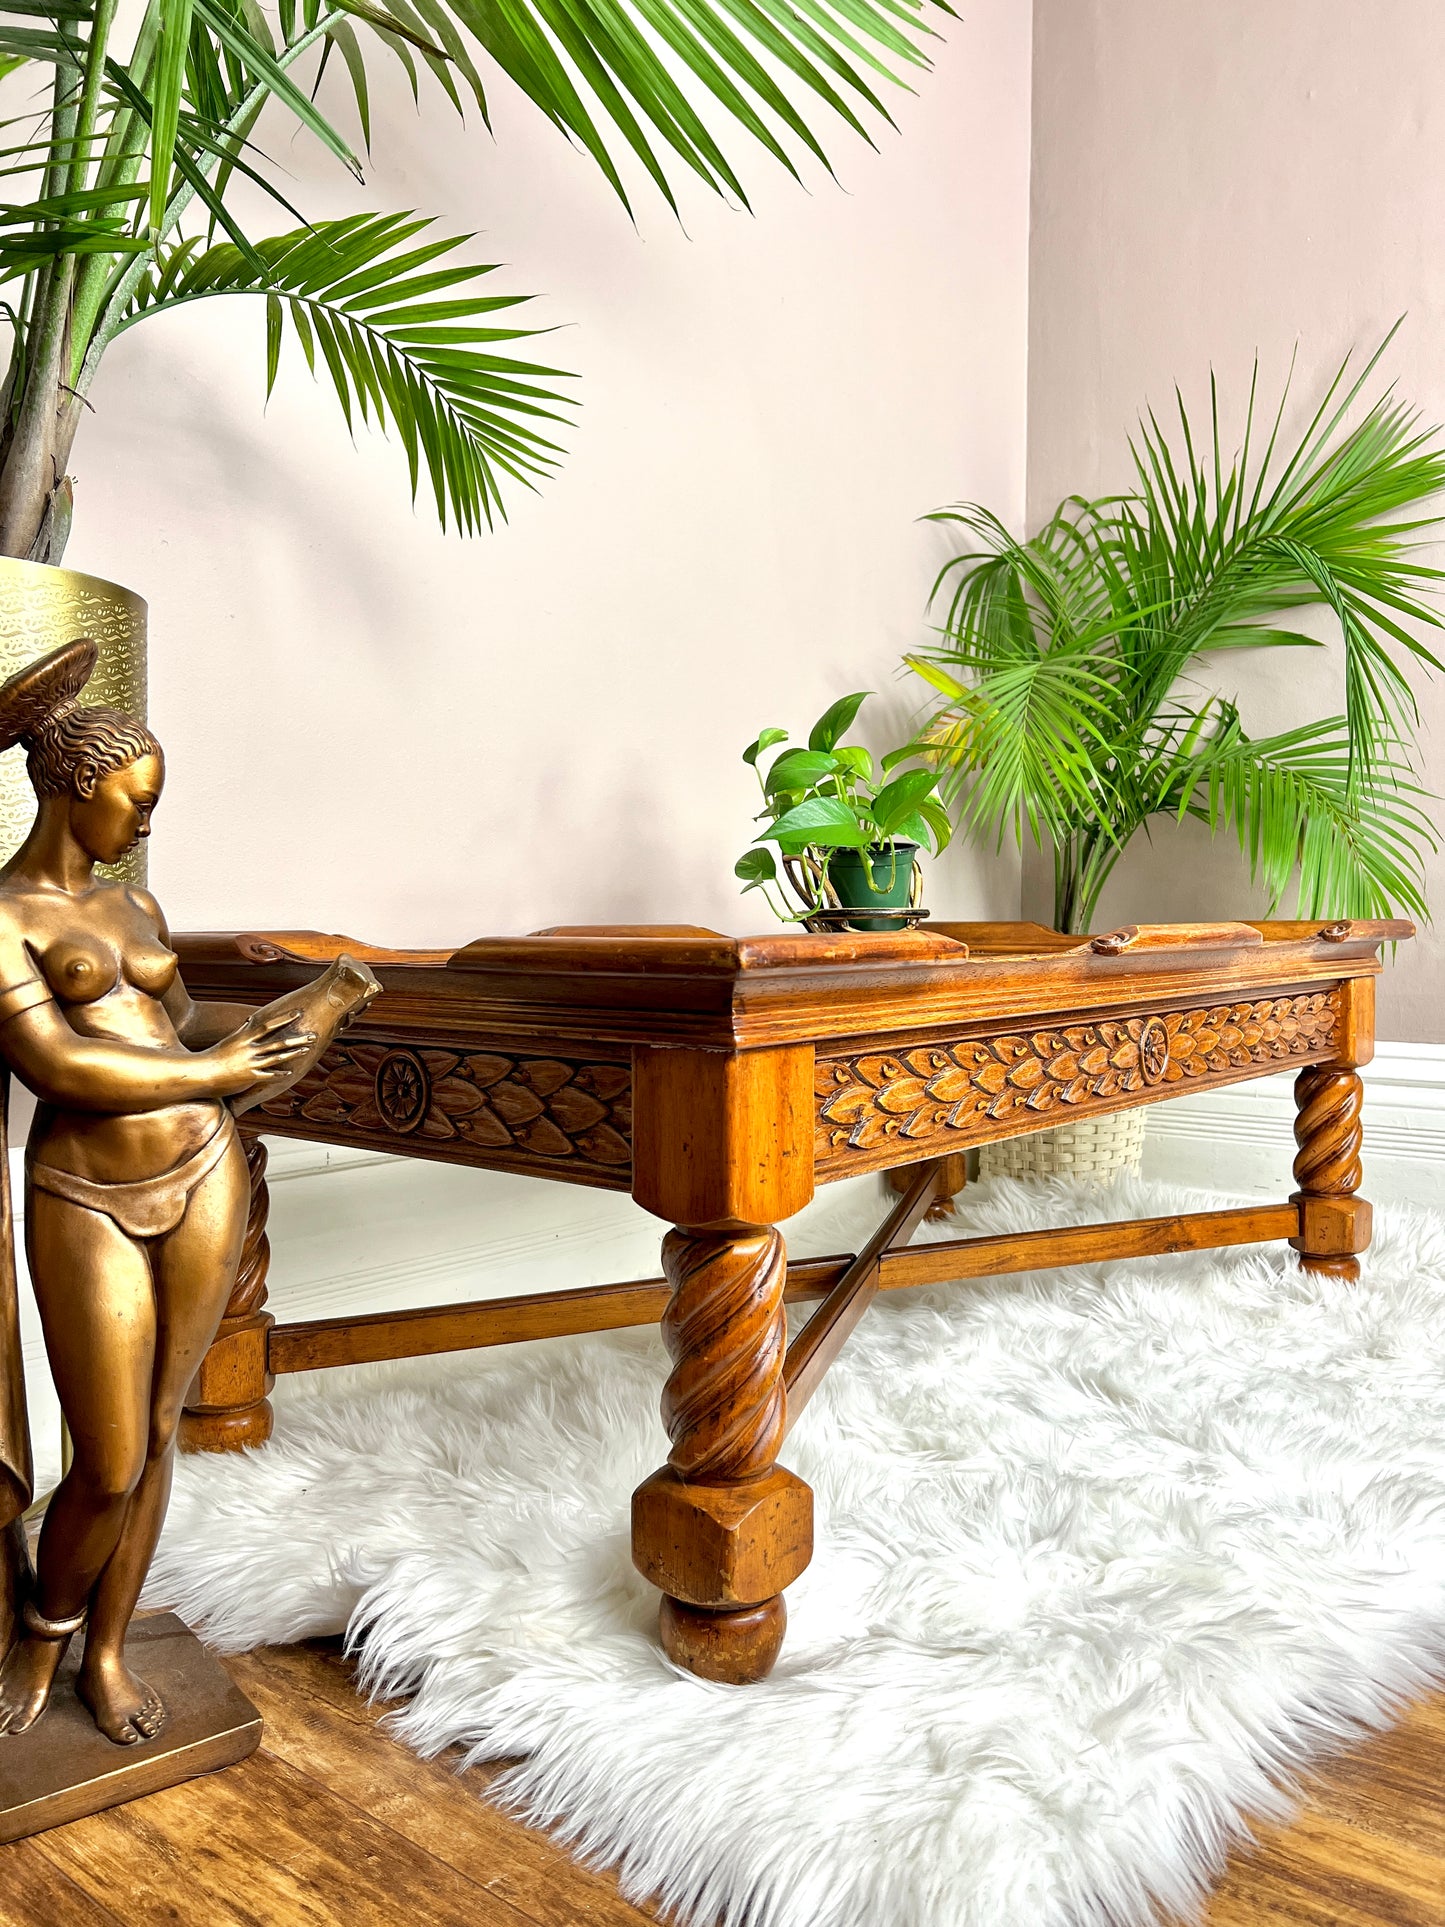 The Honey Leaf Coffee Table